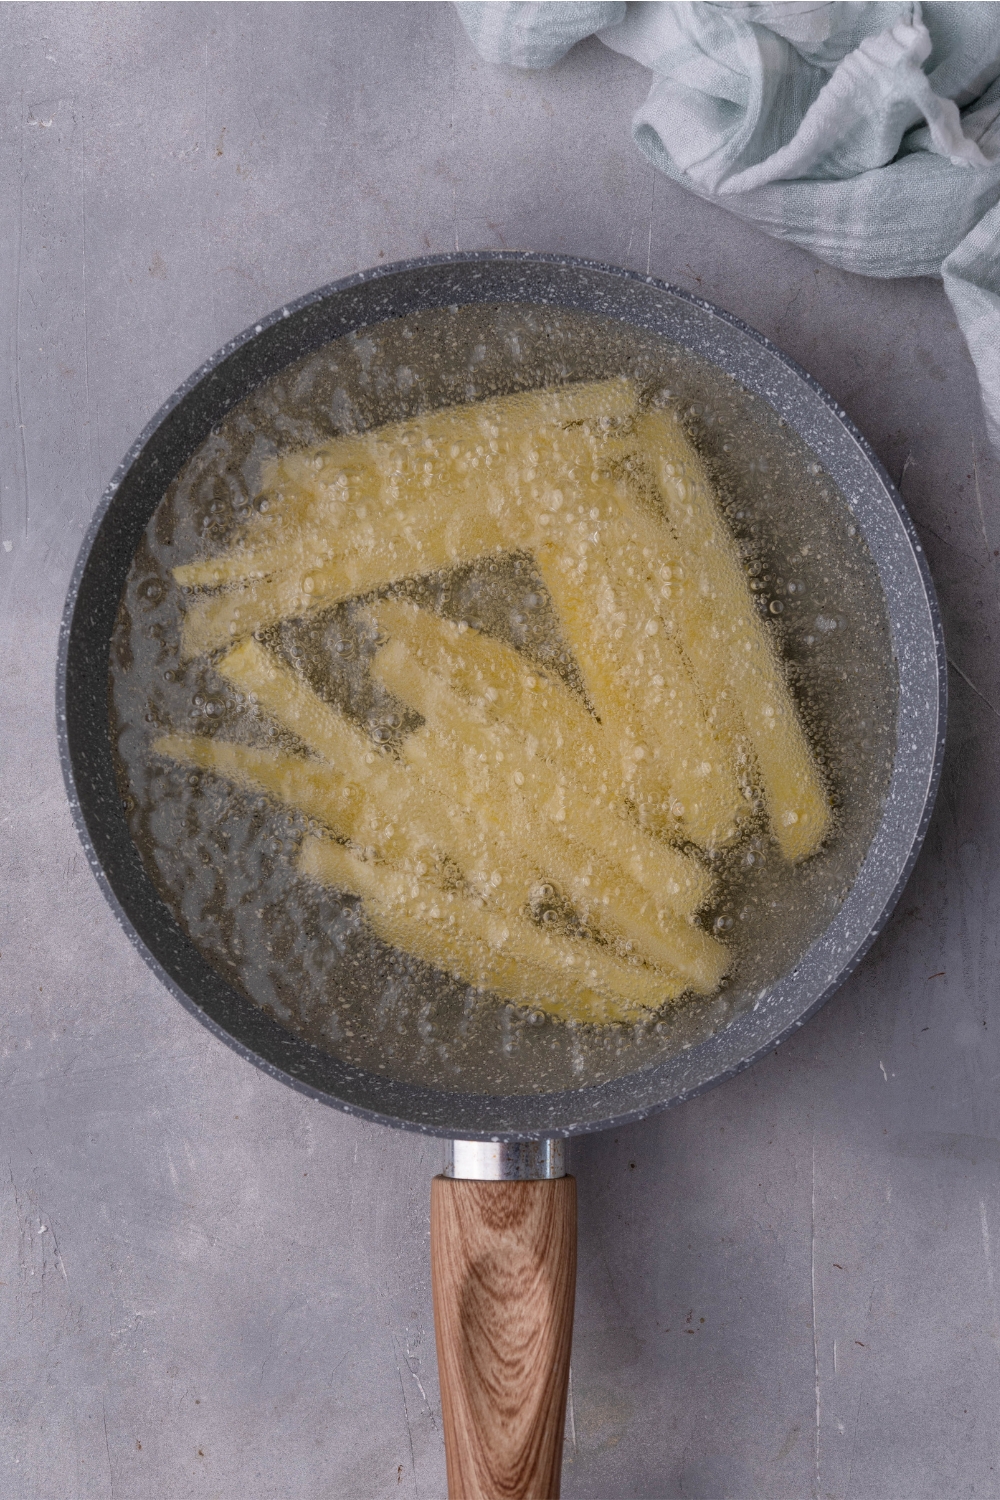 A pan of hot oil with a single layer of cut fries frying.